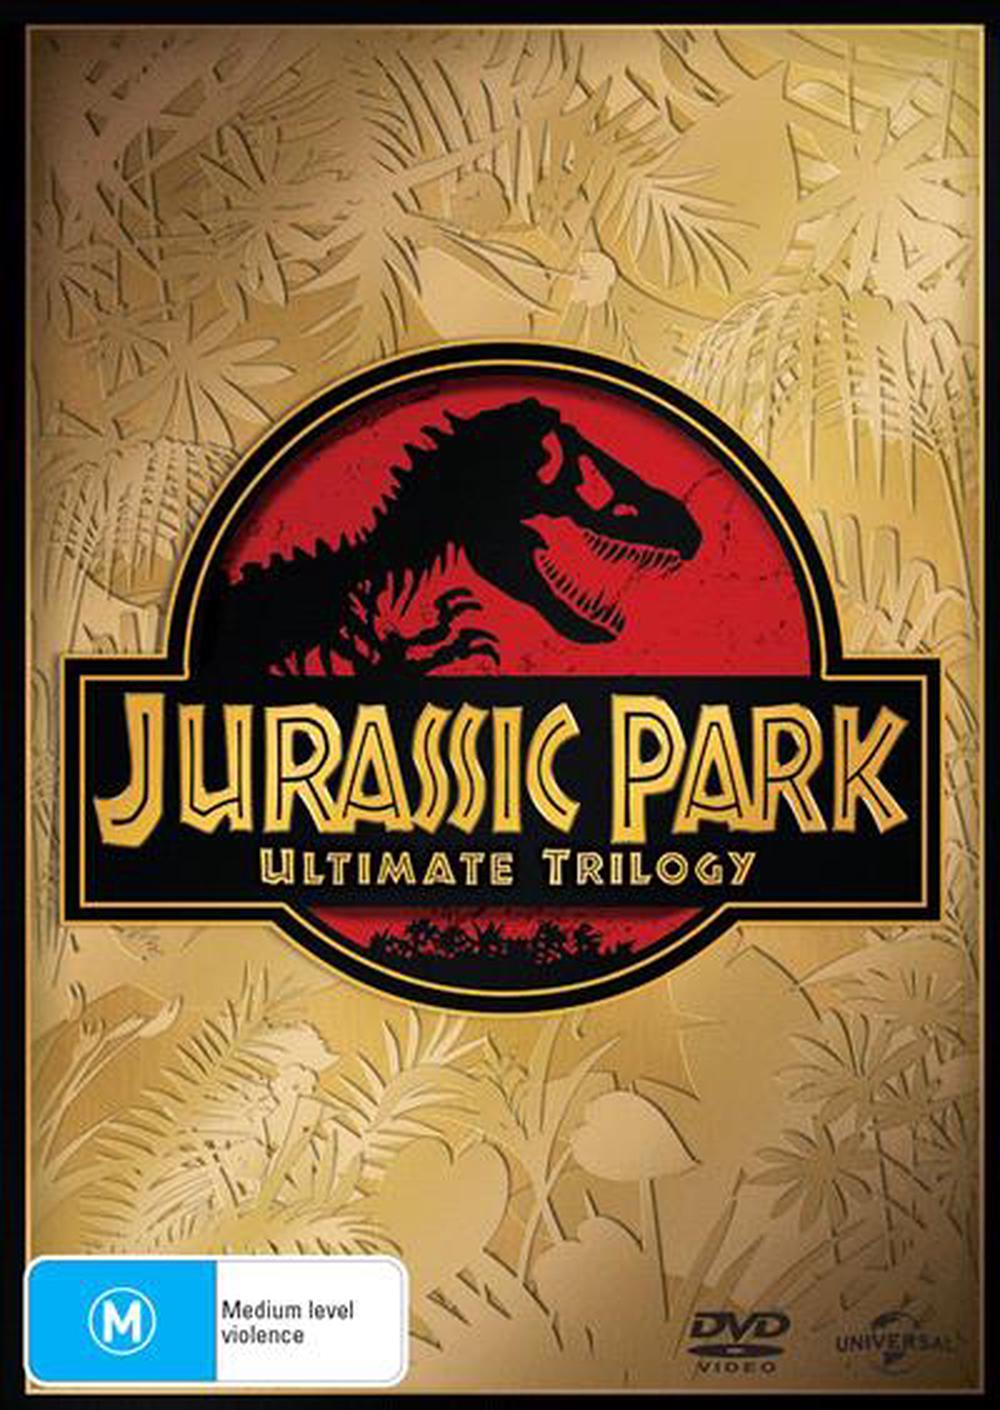 Jurassic Park Ultimate Trilogy Dvd Buy Online At The Nile 